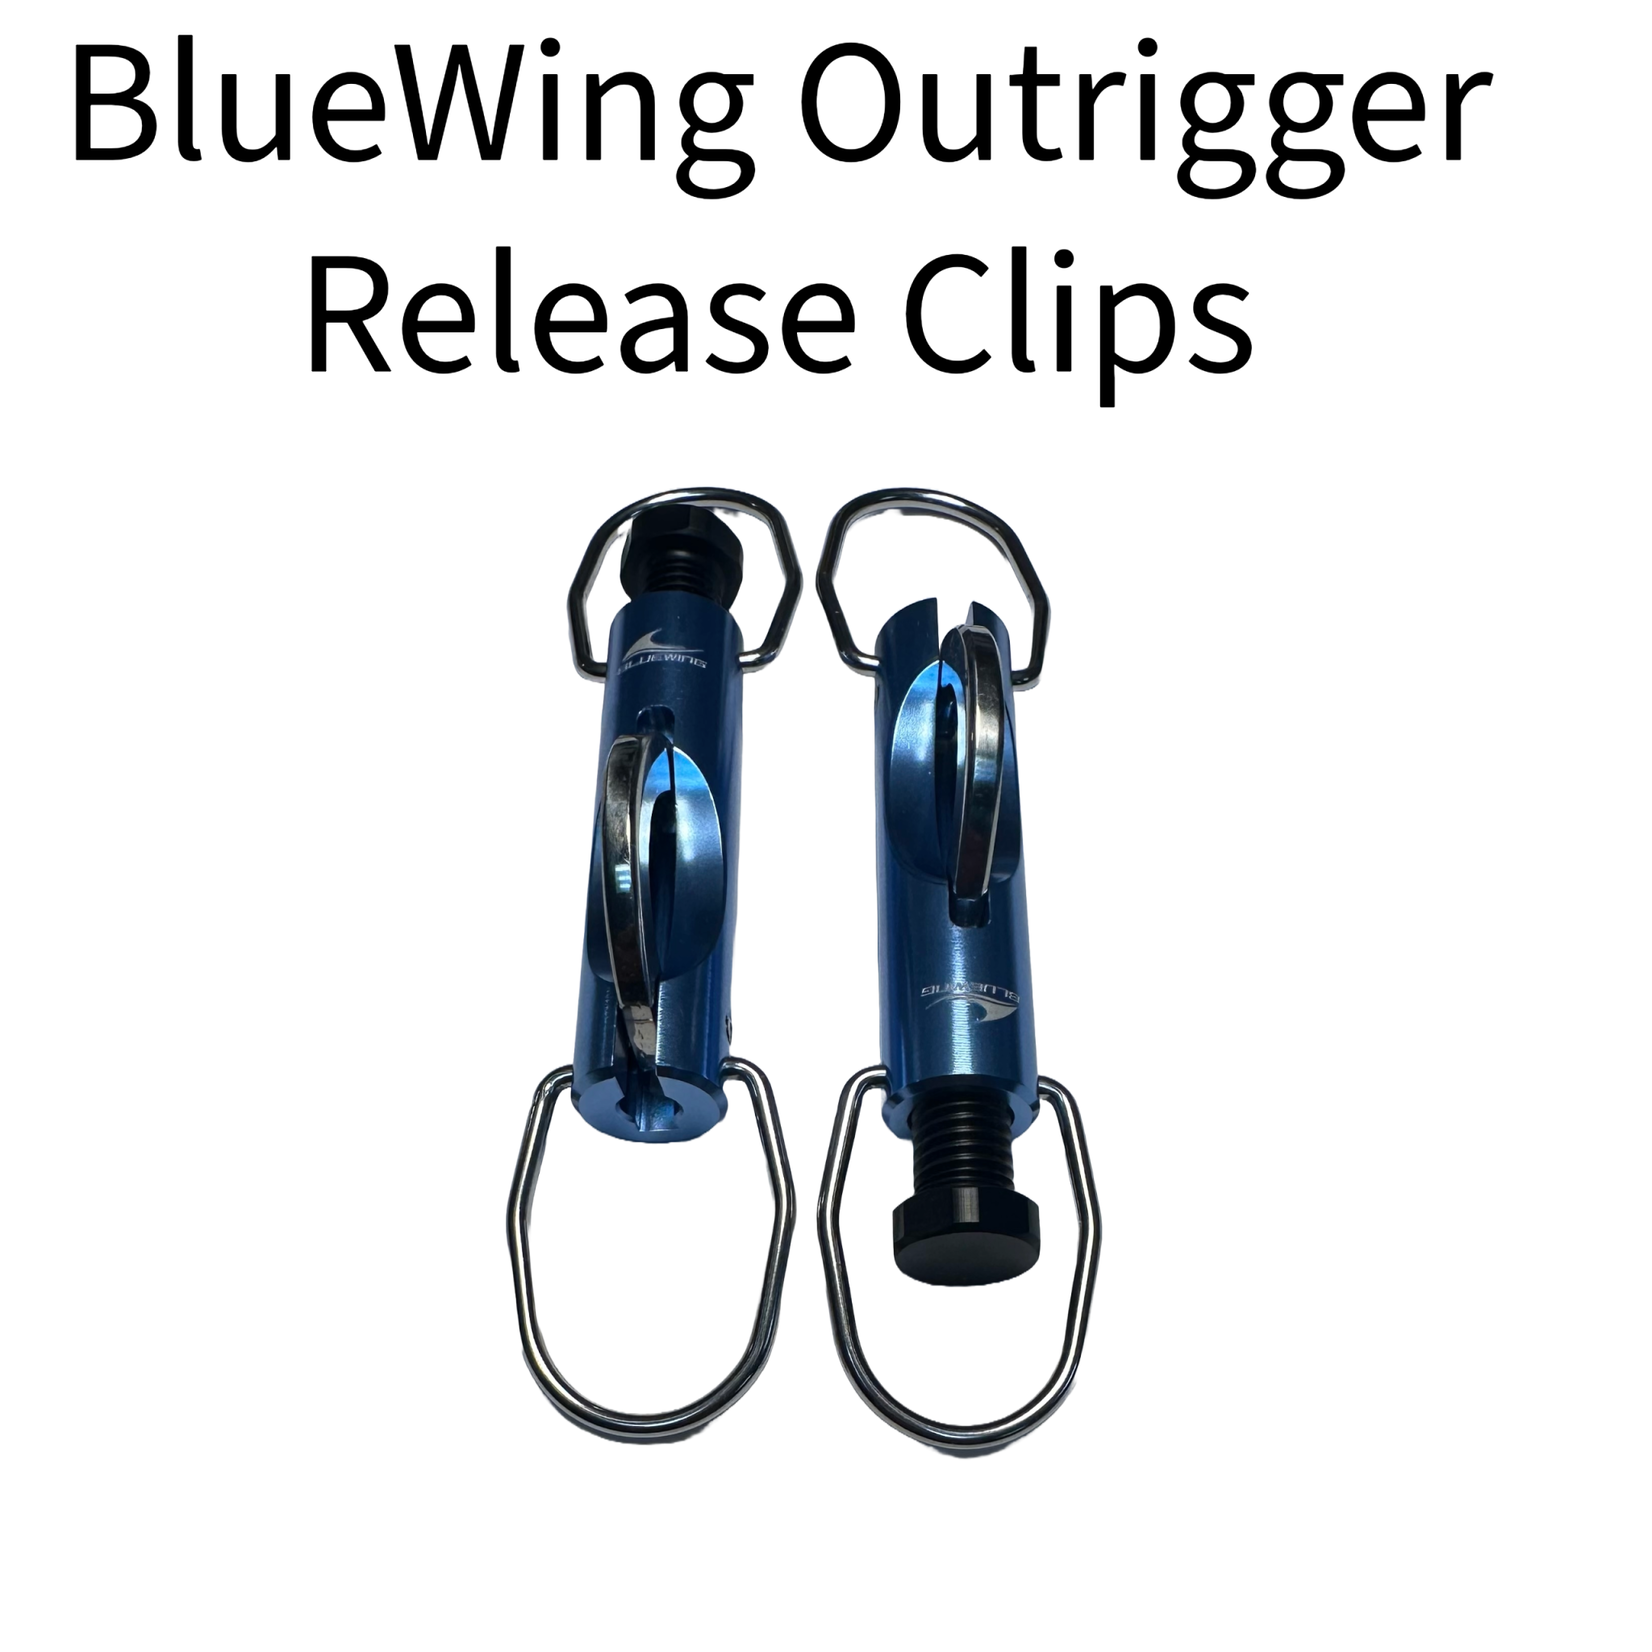 Bluewing Bluewing Outrigger Release Clips 2 pk.